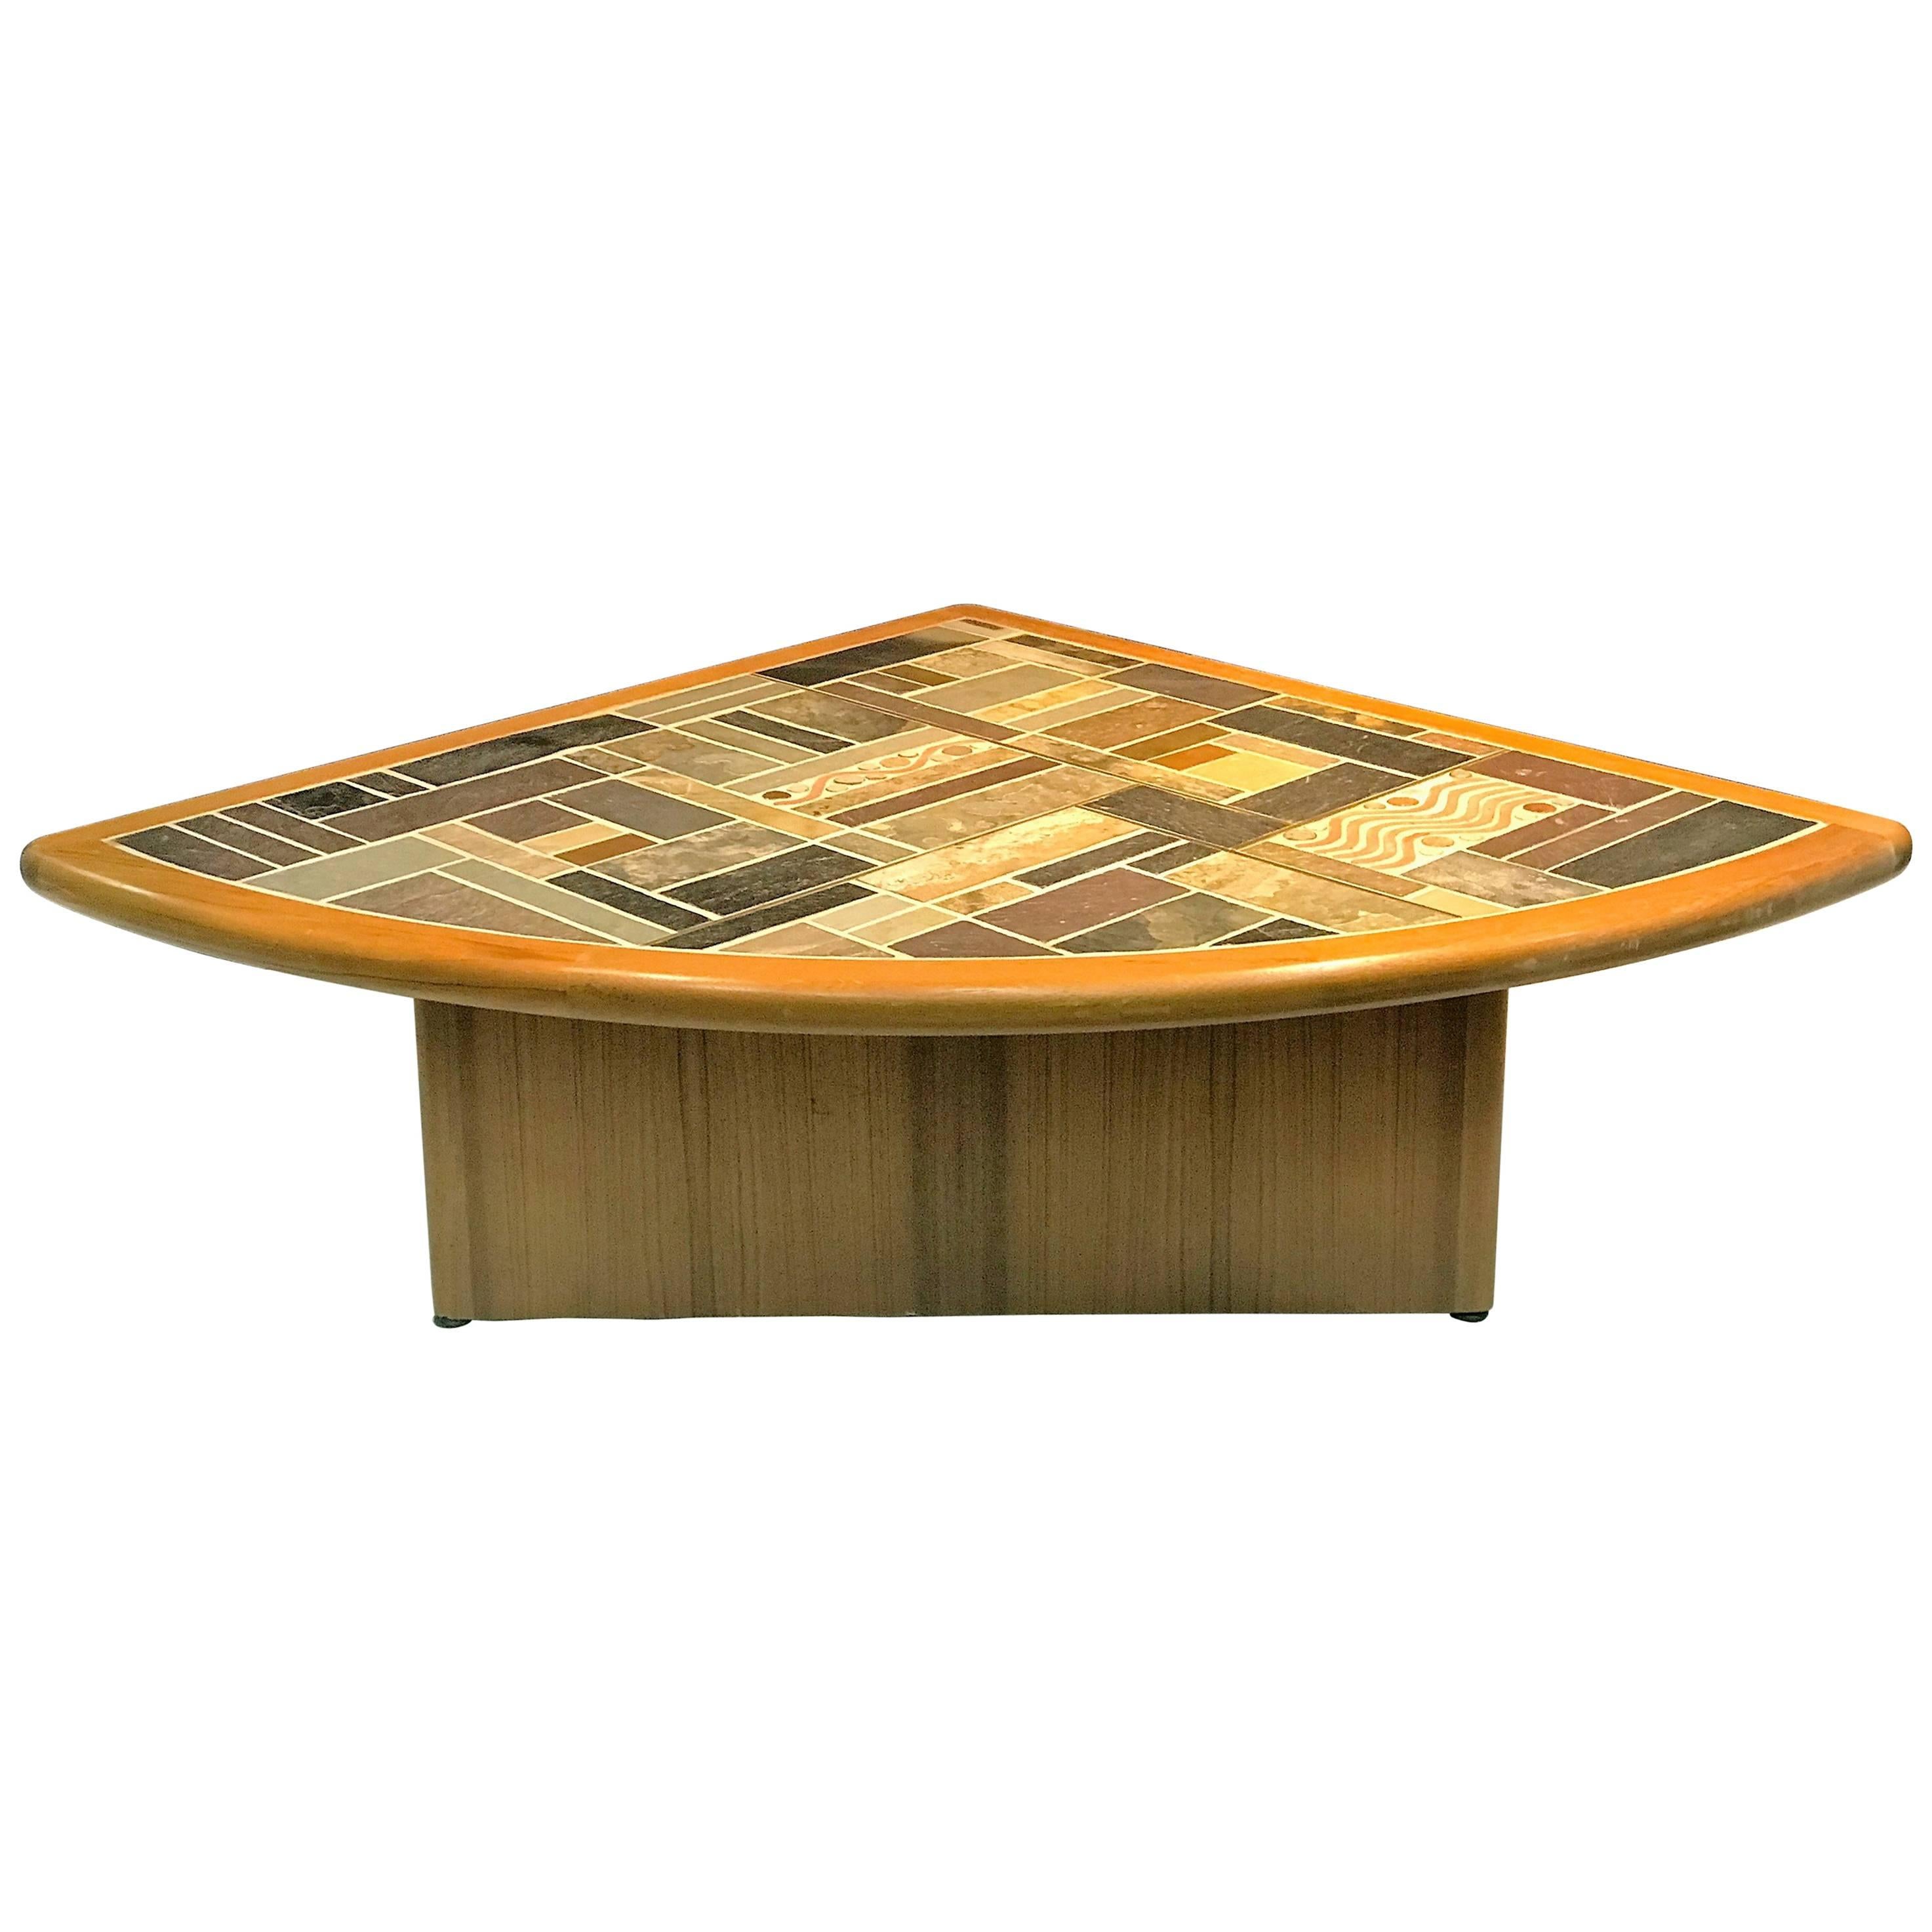 Great Danish Modern Mosaic Tile-Top Triangle Wedge Coffee Table For Sale